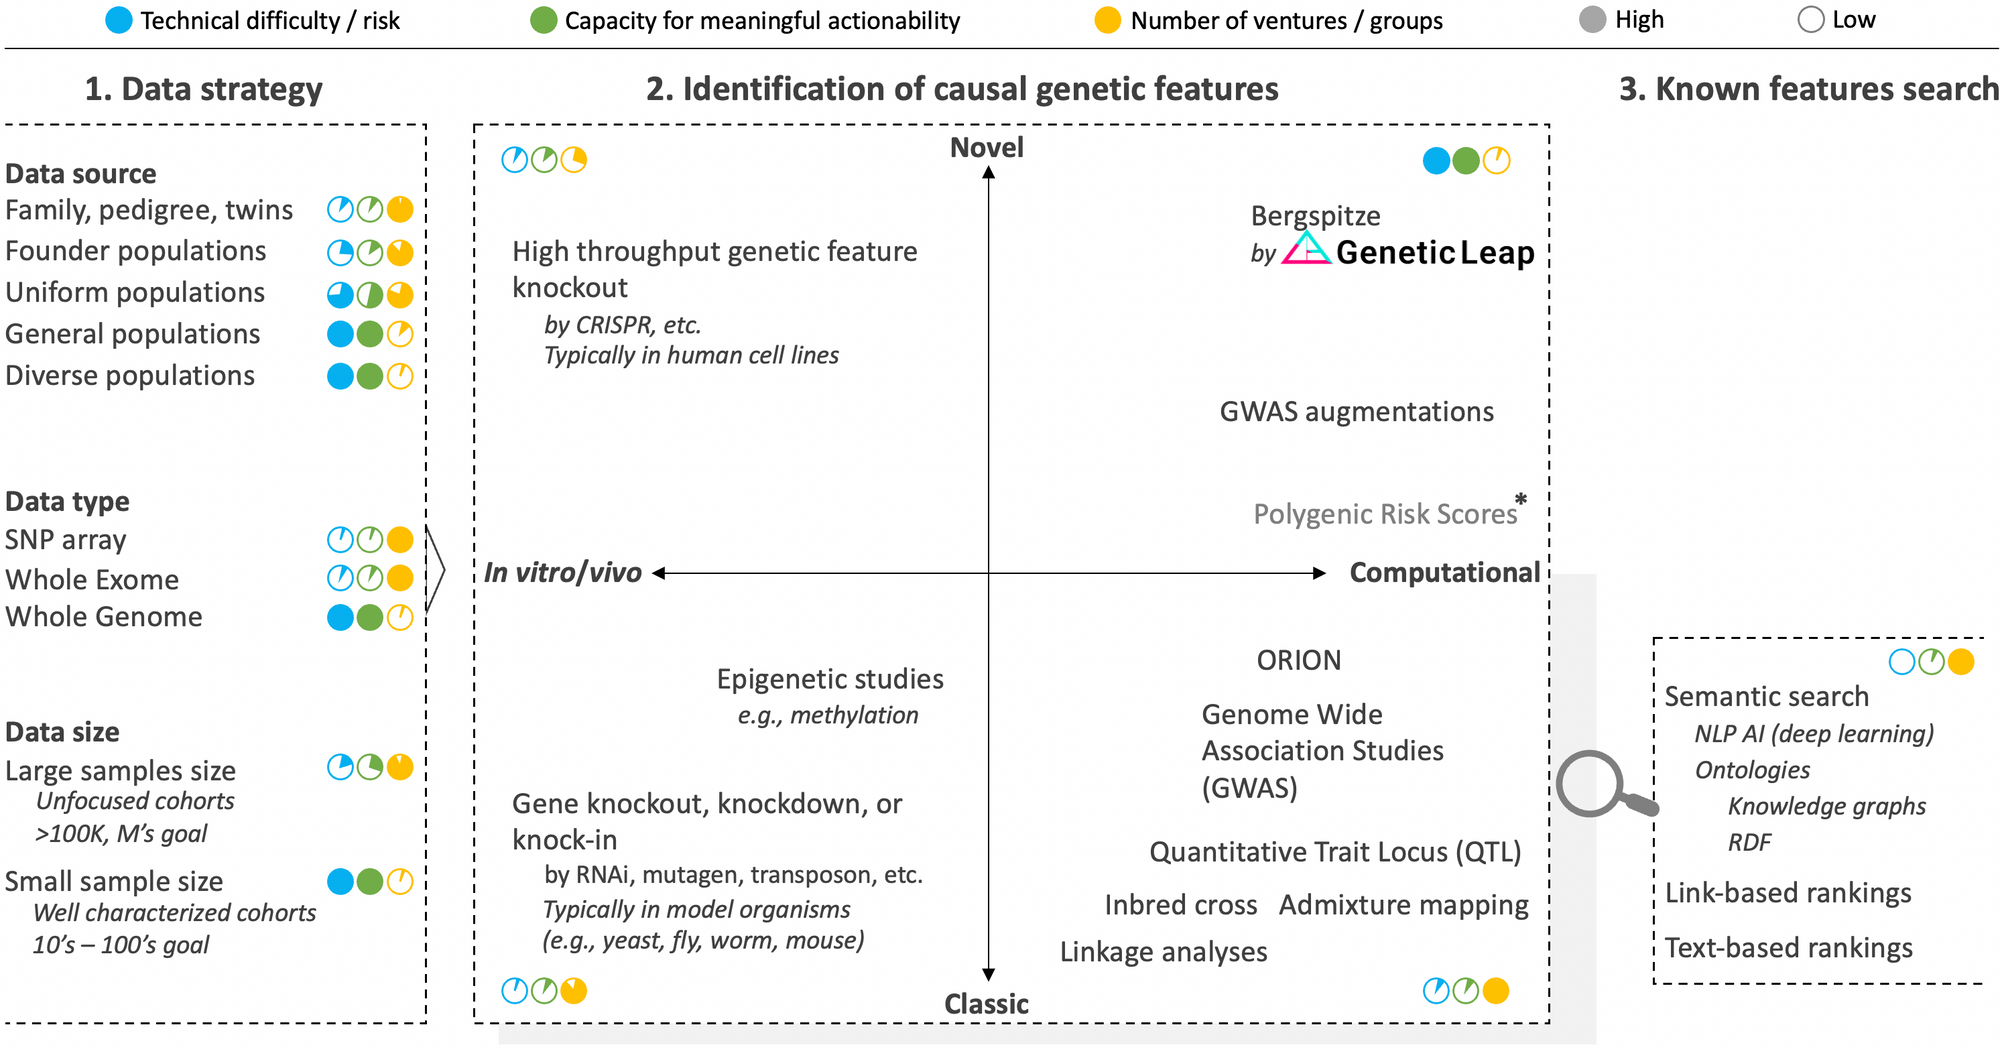 Genome analysis strategies: a closer look at layer III of the genomic space